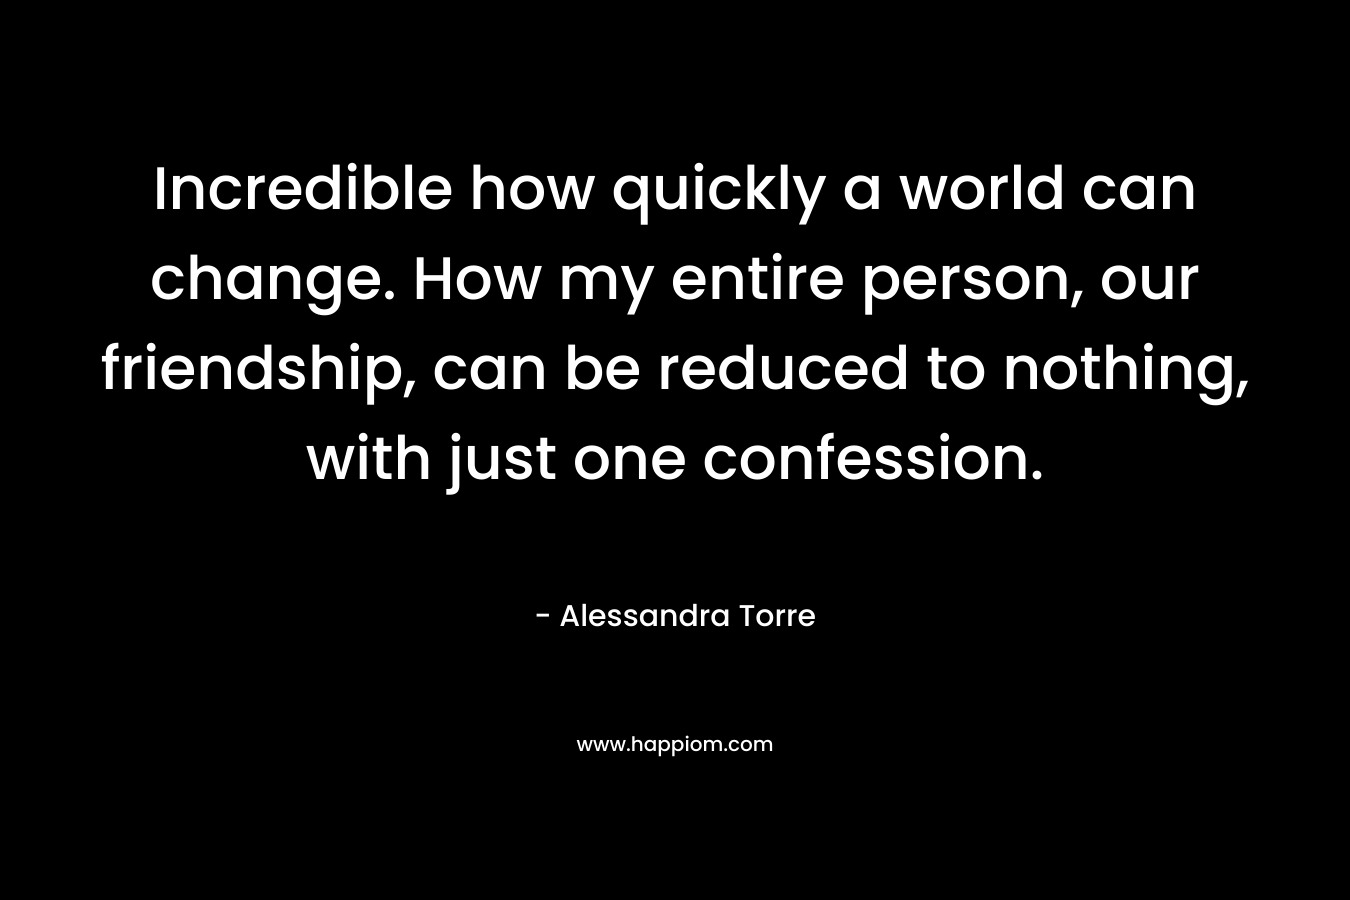 Incredible how quickly a world can change. How my entire person, our friendship, can be reduced to nothing, with just one confession. – Alessandra Torre